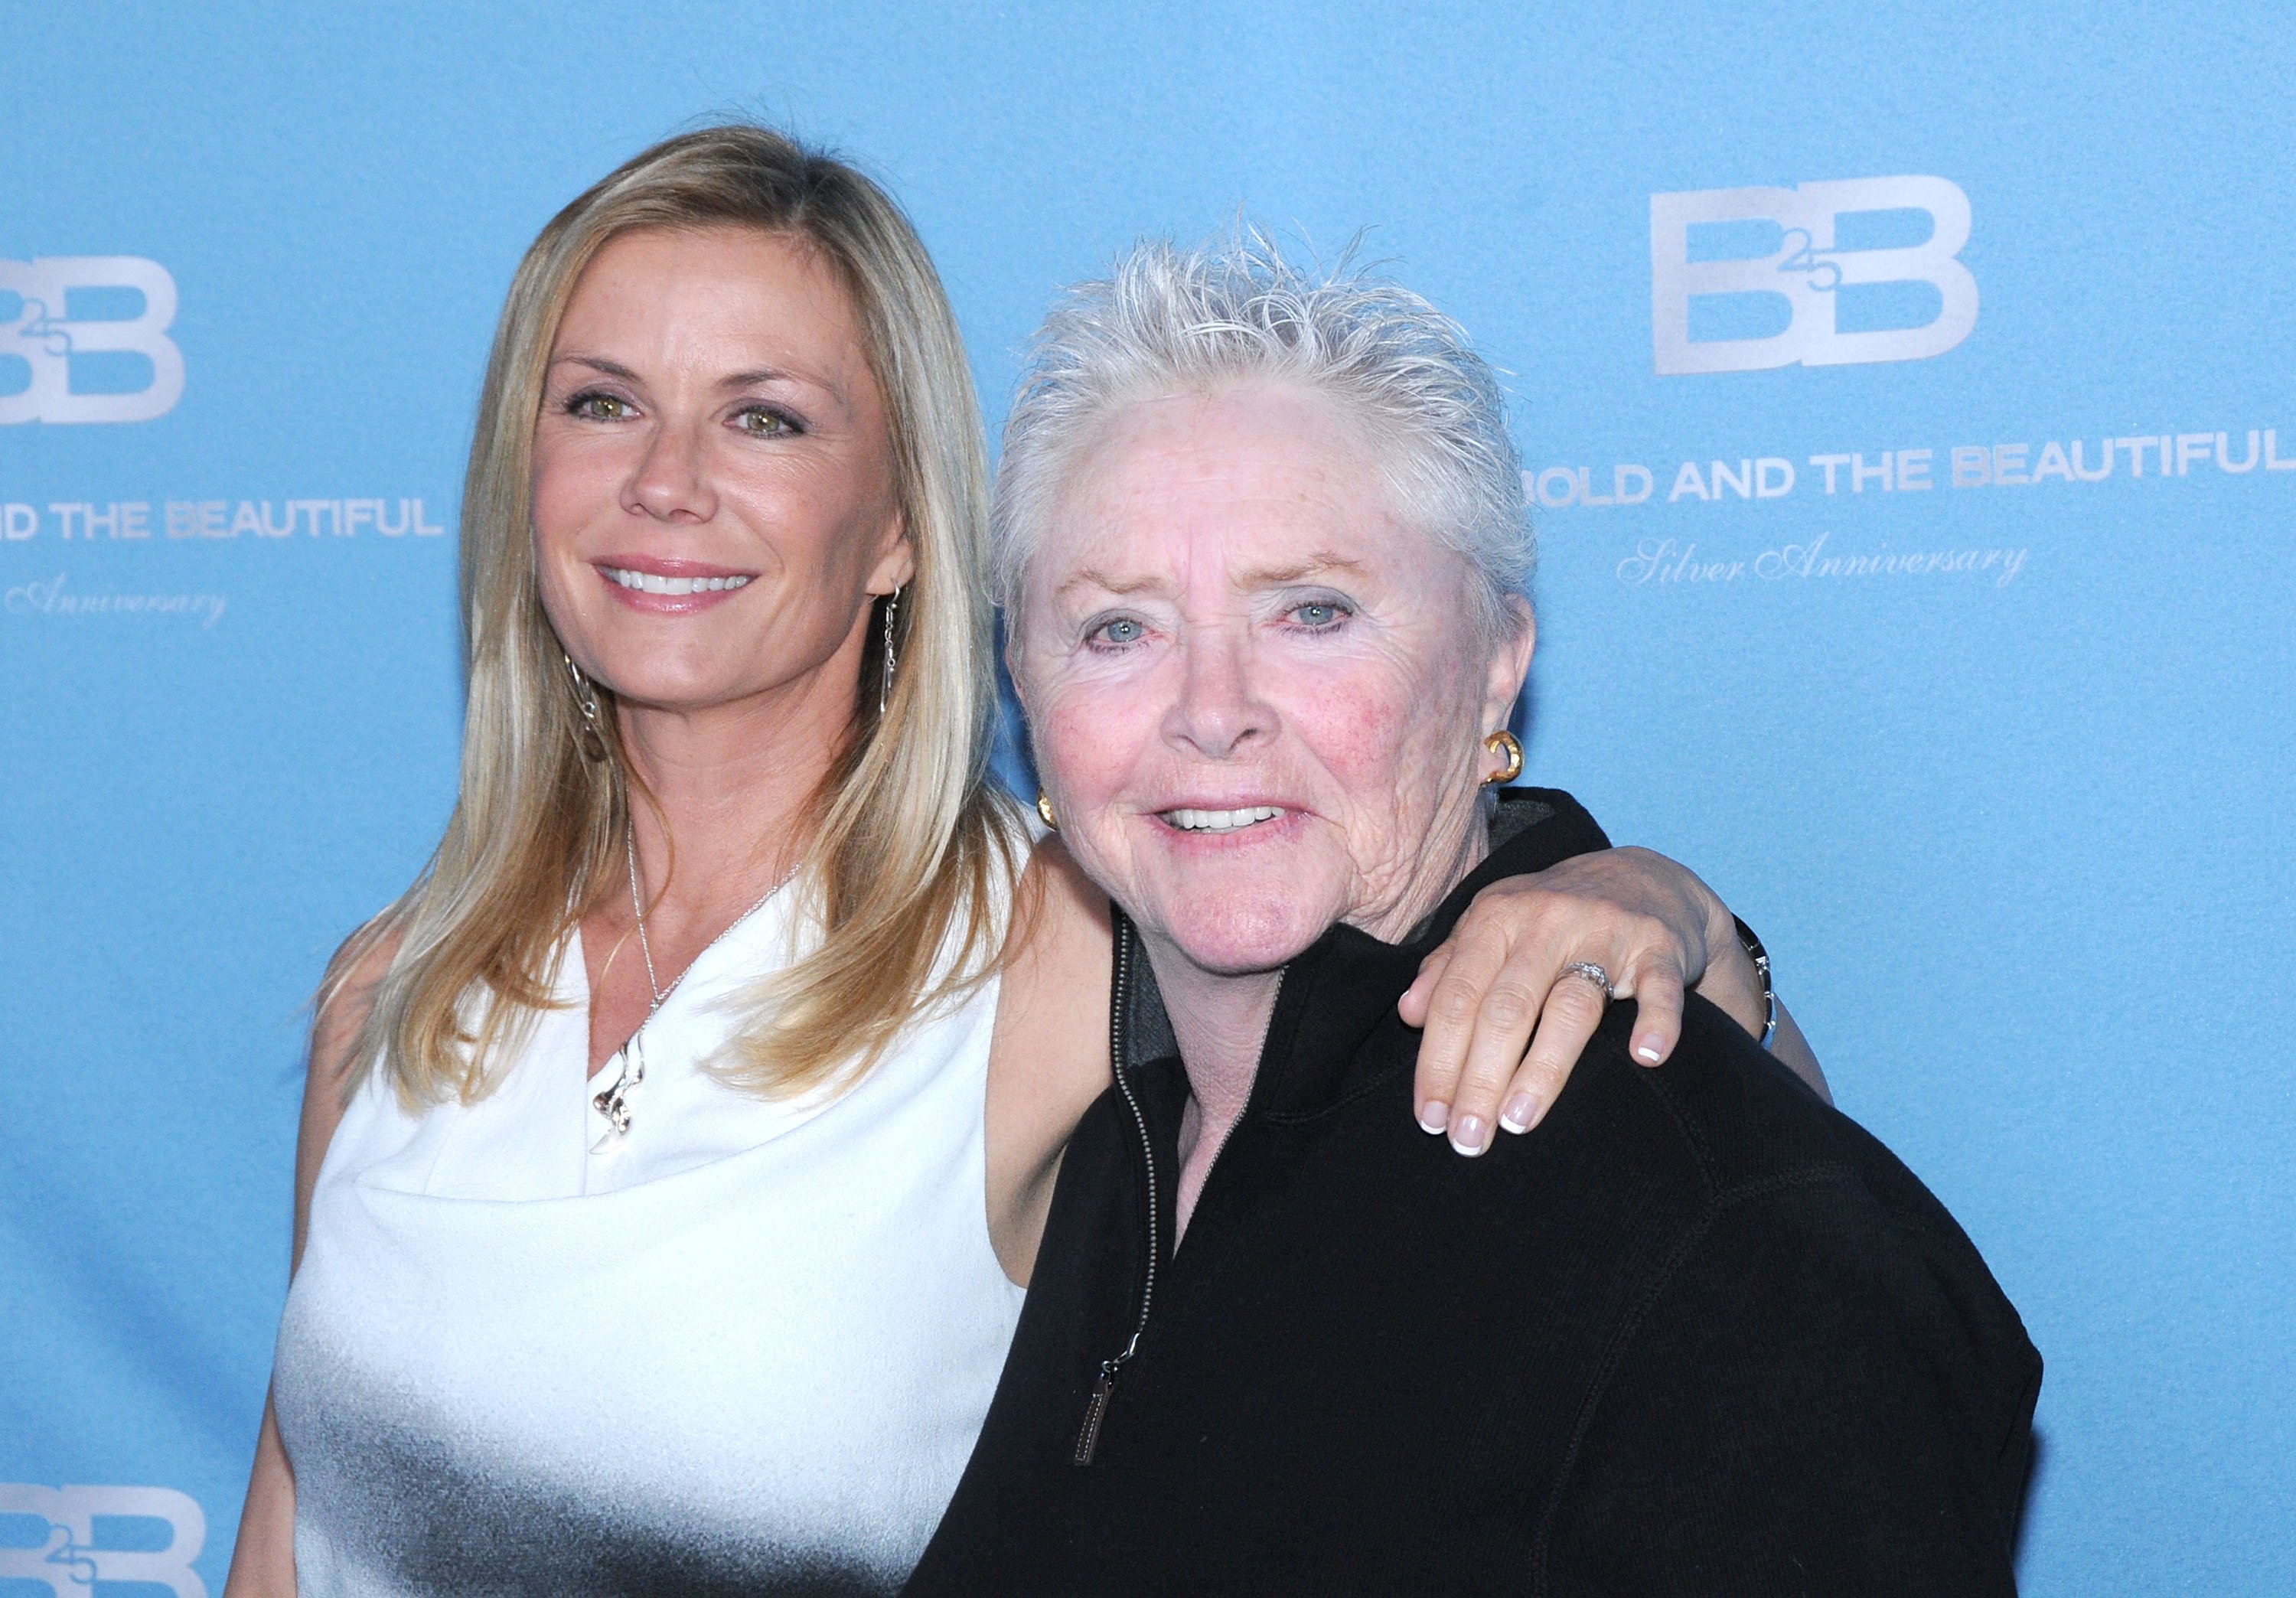 'The Bold and the Beautiful' actor Katherine Kelly Lang in a white blouse and Susan Flannery in a black jacket, share a side hug.